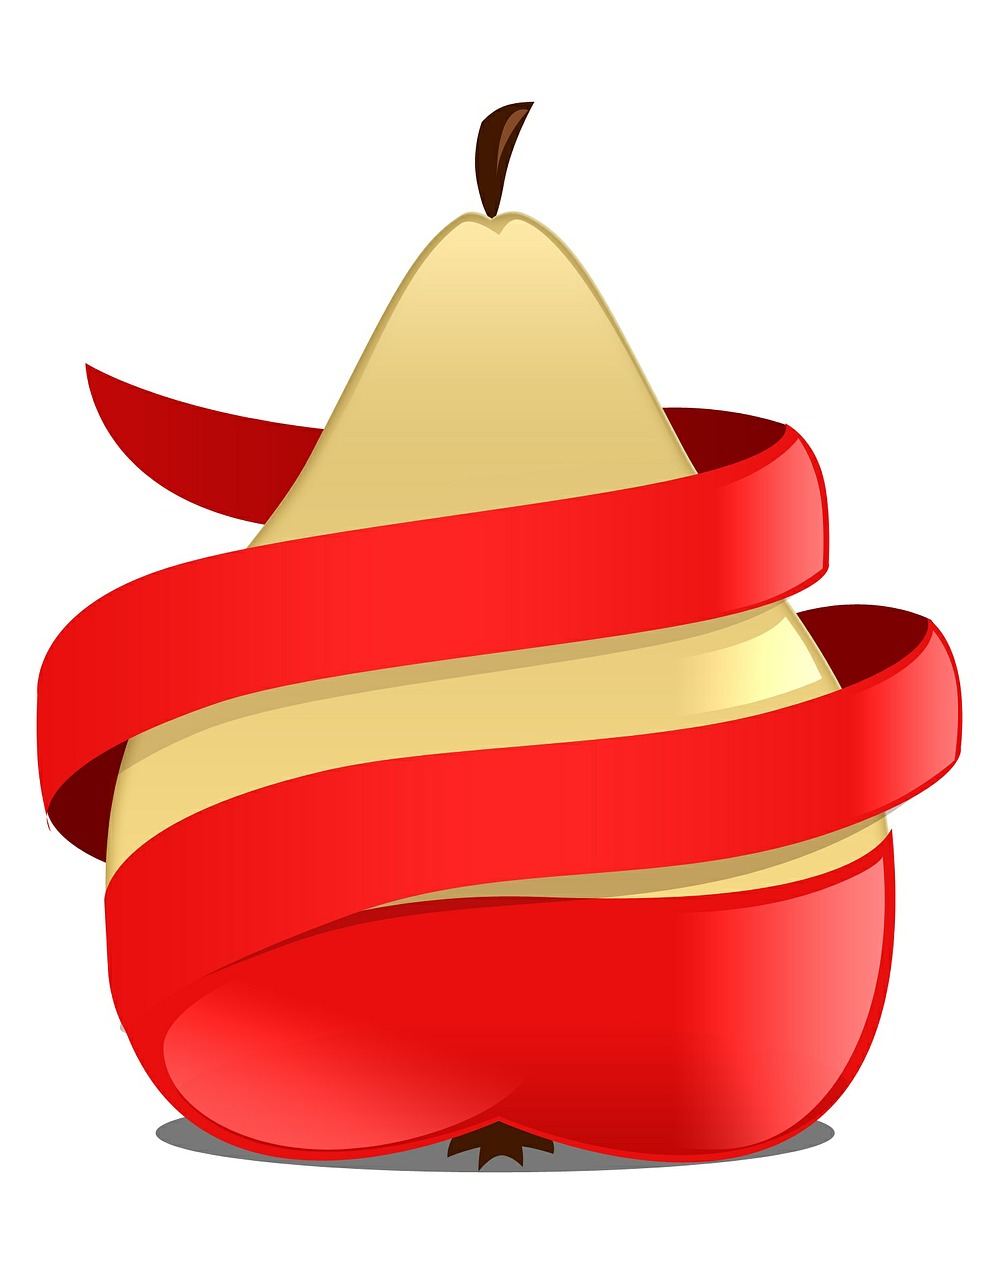 apple pear red free photo